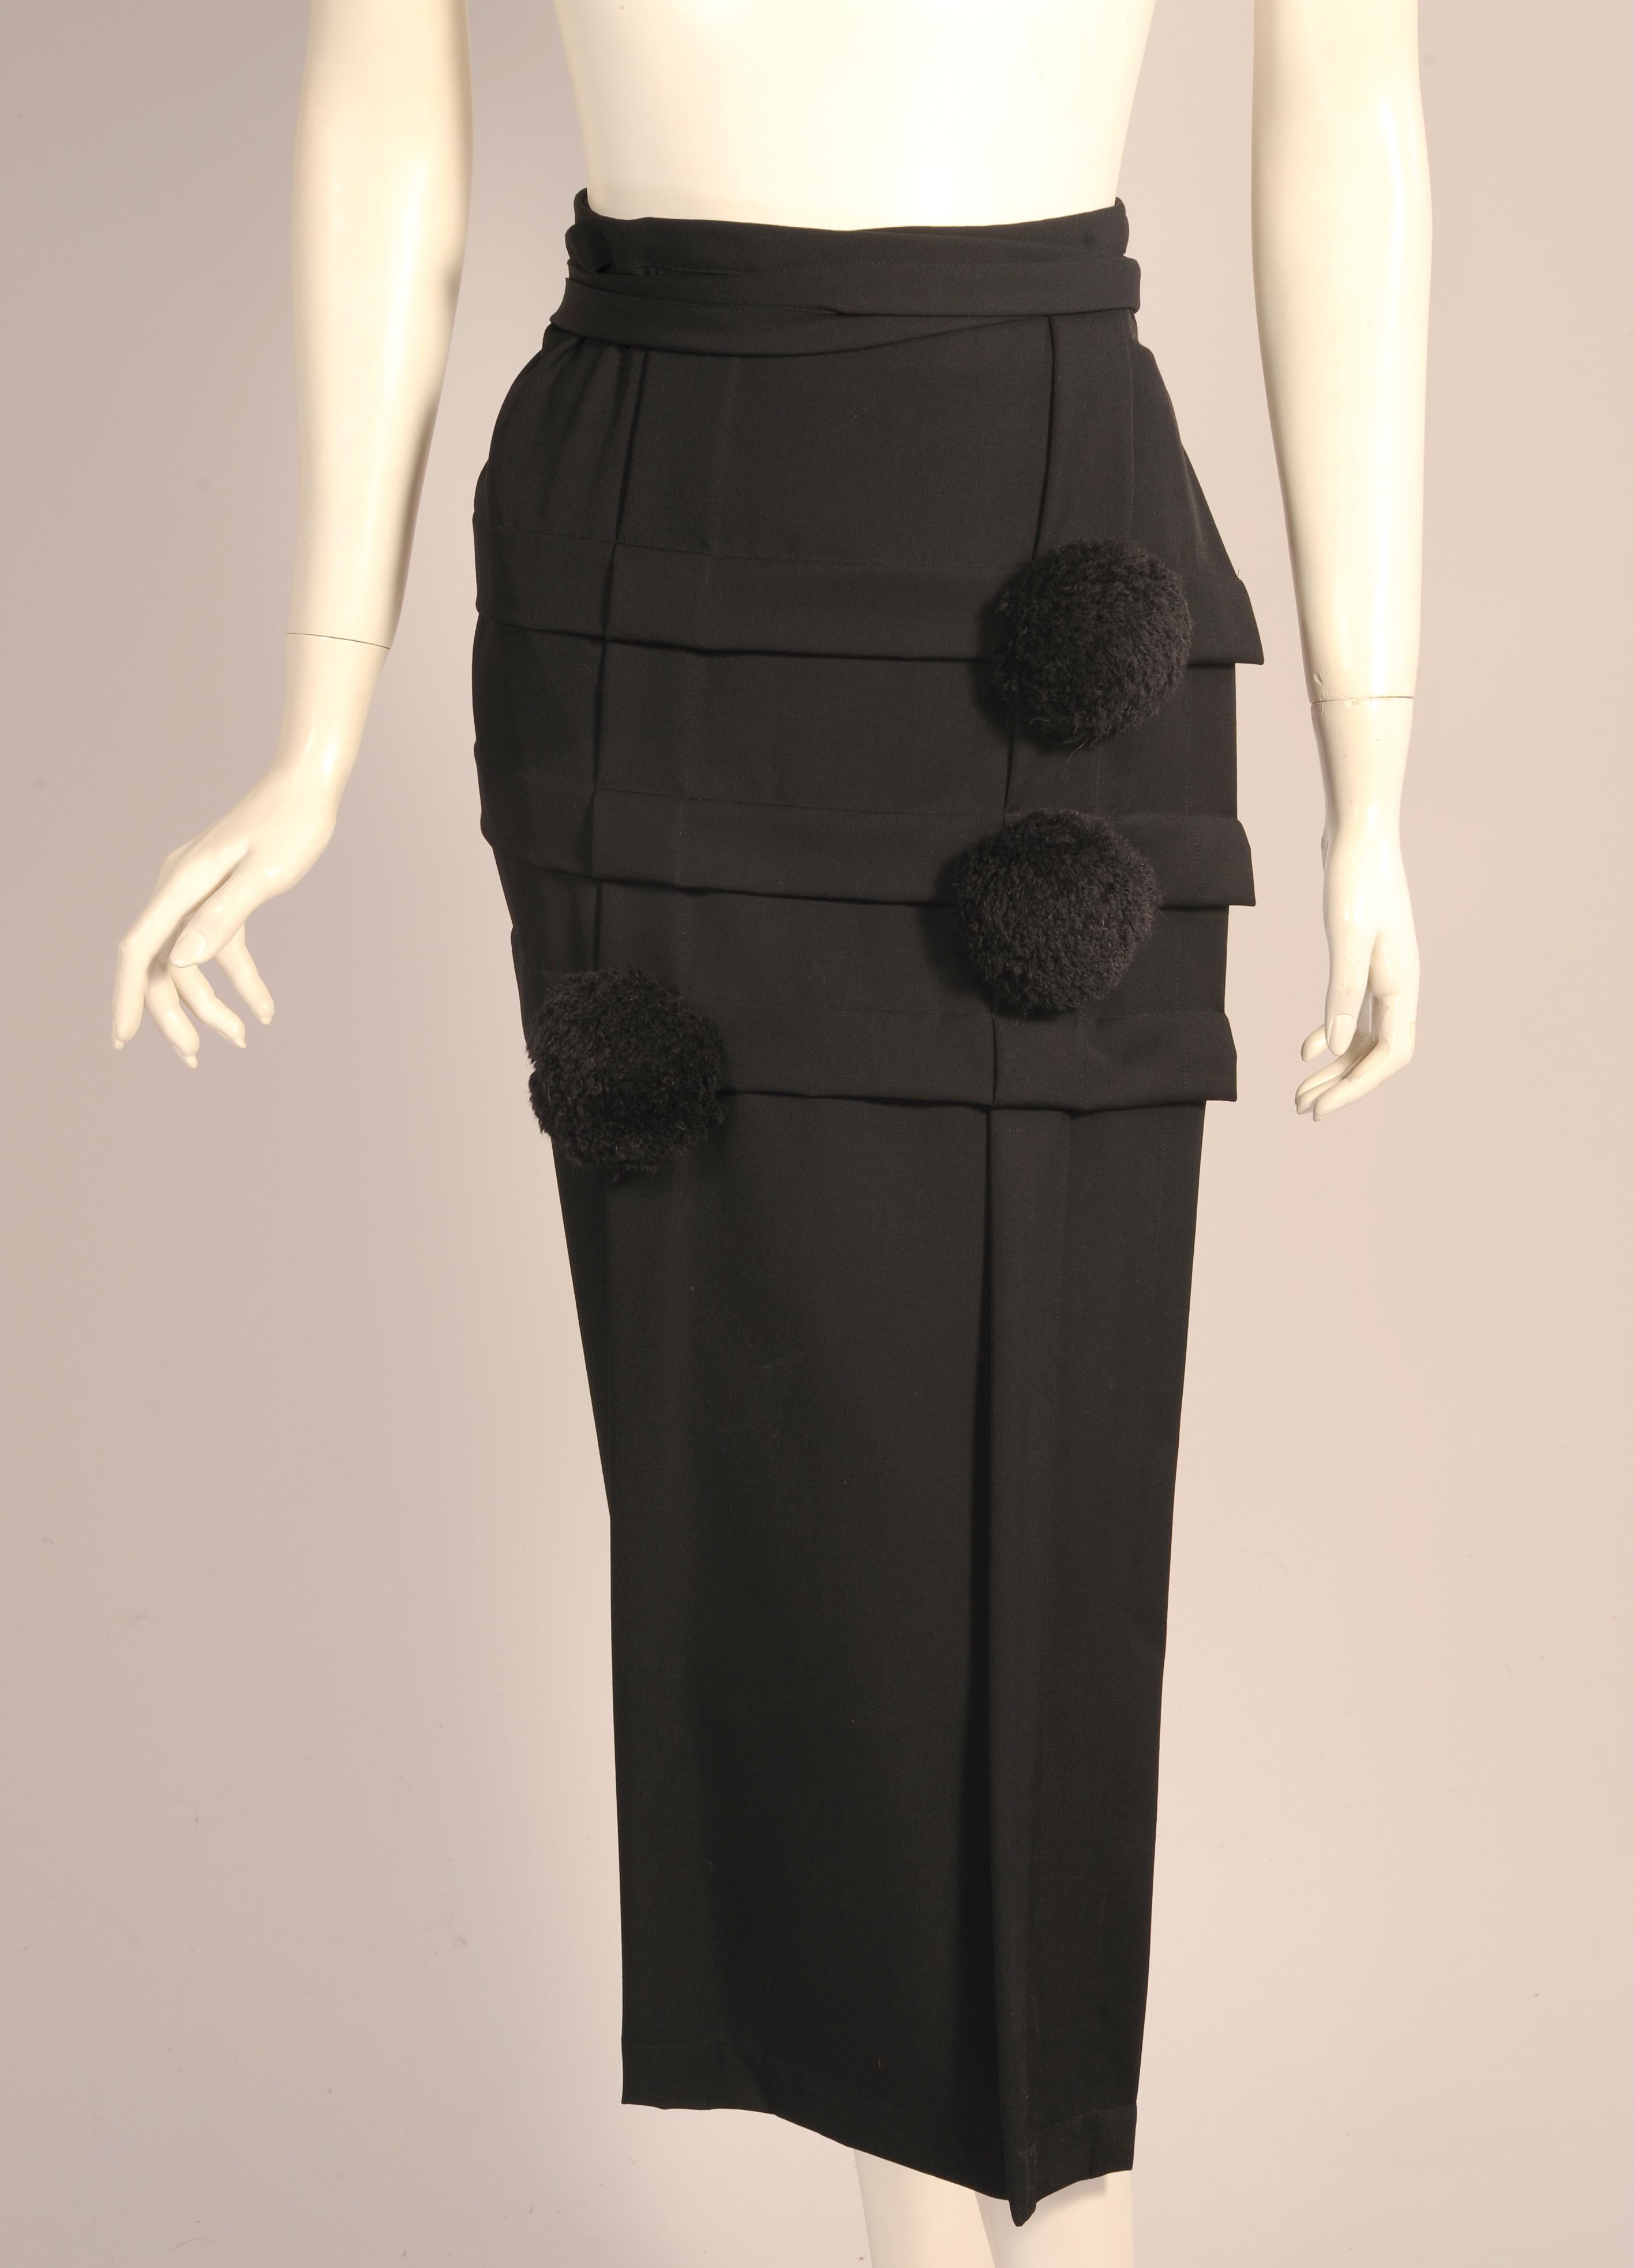 This sleek black wool rectangular wrap skirt has a gri9d of wide pleats at the front. Two are vertical from waist to hem and three are horizontal at the top of the skirt. They are embellished at their intersections with three large black wool